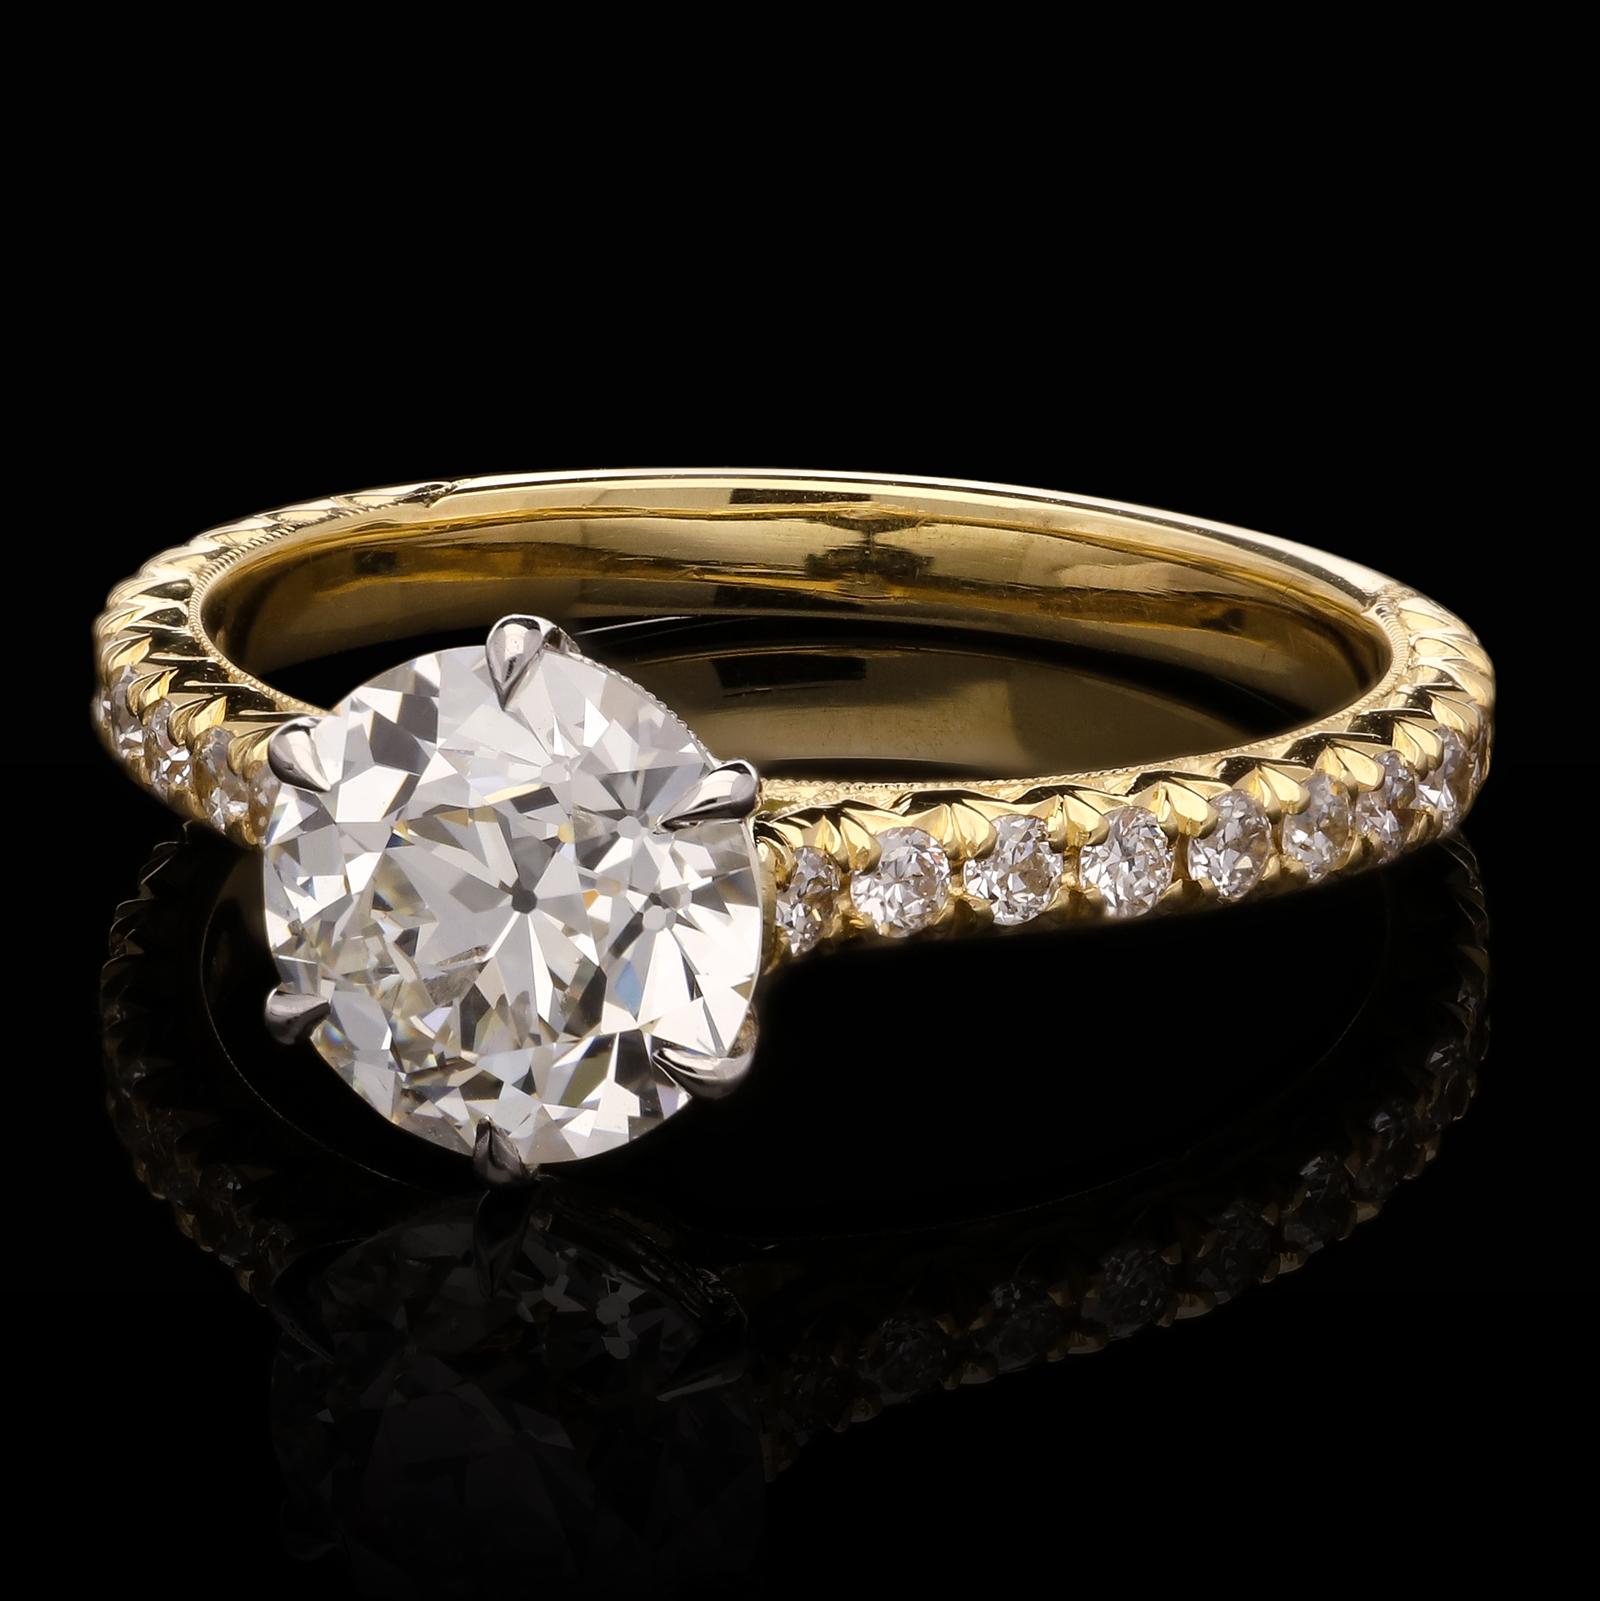 A classic old-cut diamond solitaire ring by Hancocks, centred with an old European brilliant cut diamond weighing 1.43cts and of I colour and VS2 clarity claw set in platinum with a hand engraved gallery, to an 18ct yellow gold mount, the shoulders